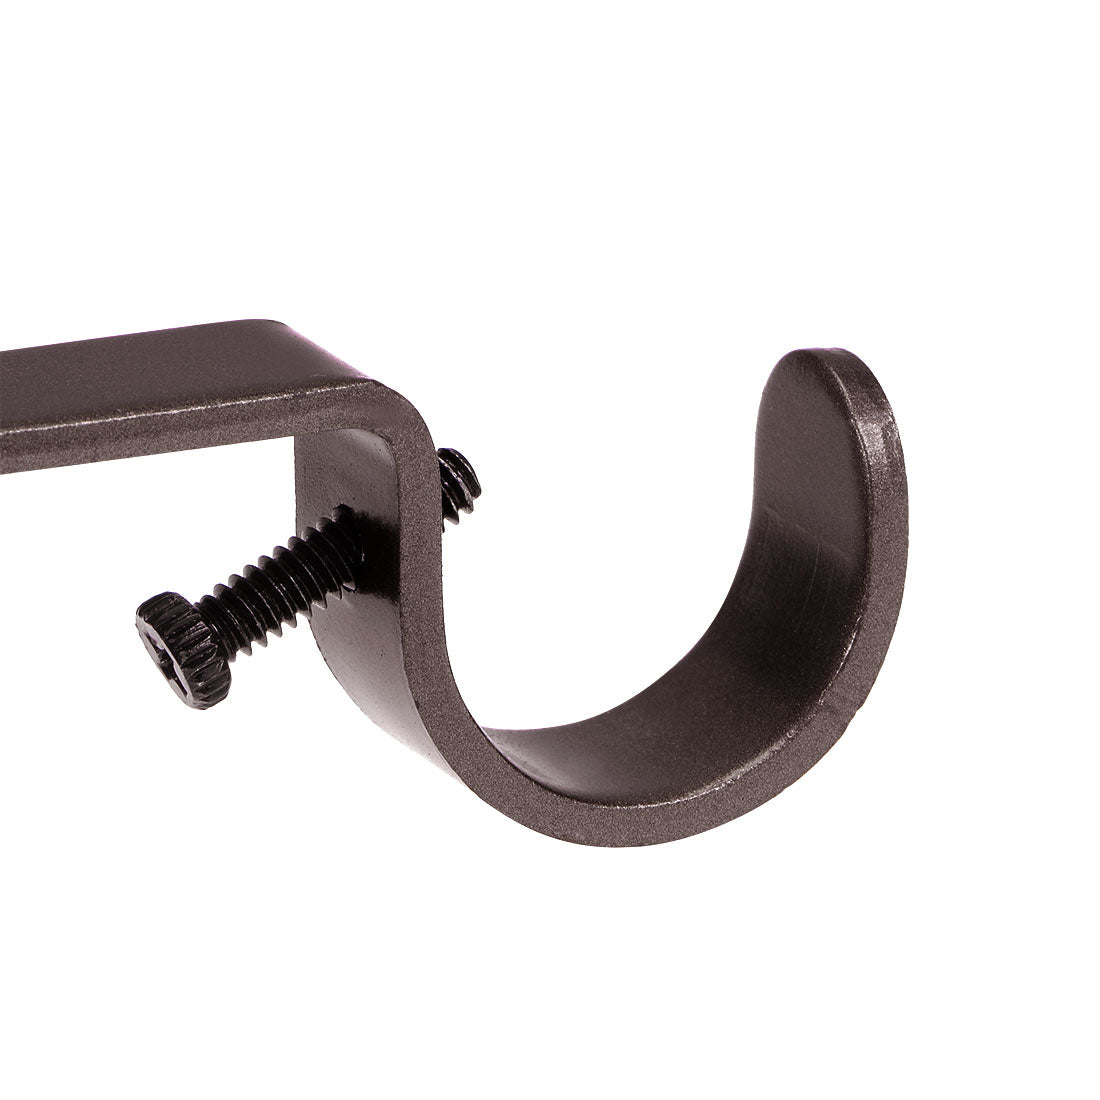 uxcell Uxcell Curtain Rod Bracket Iron Double Holder Support for 18mm 27mm Drapery Rod, 122 x 51 x 16mm Brown